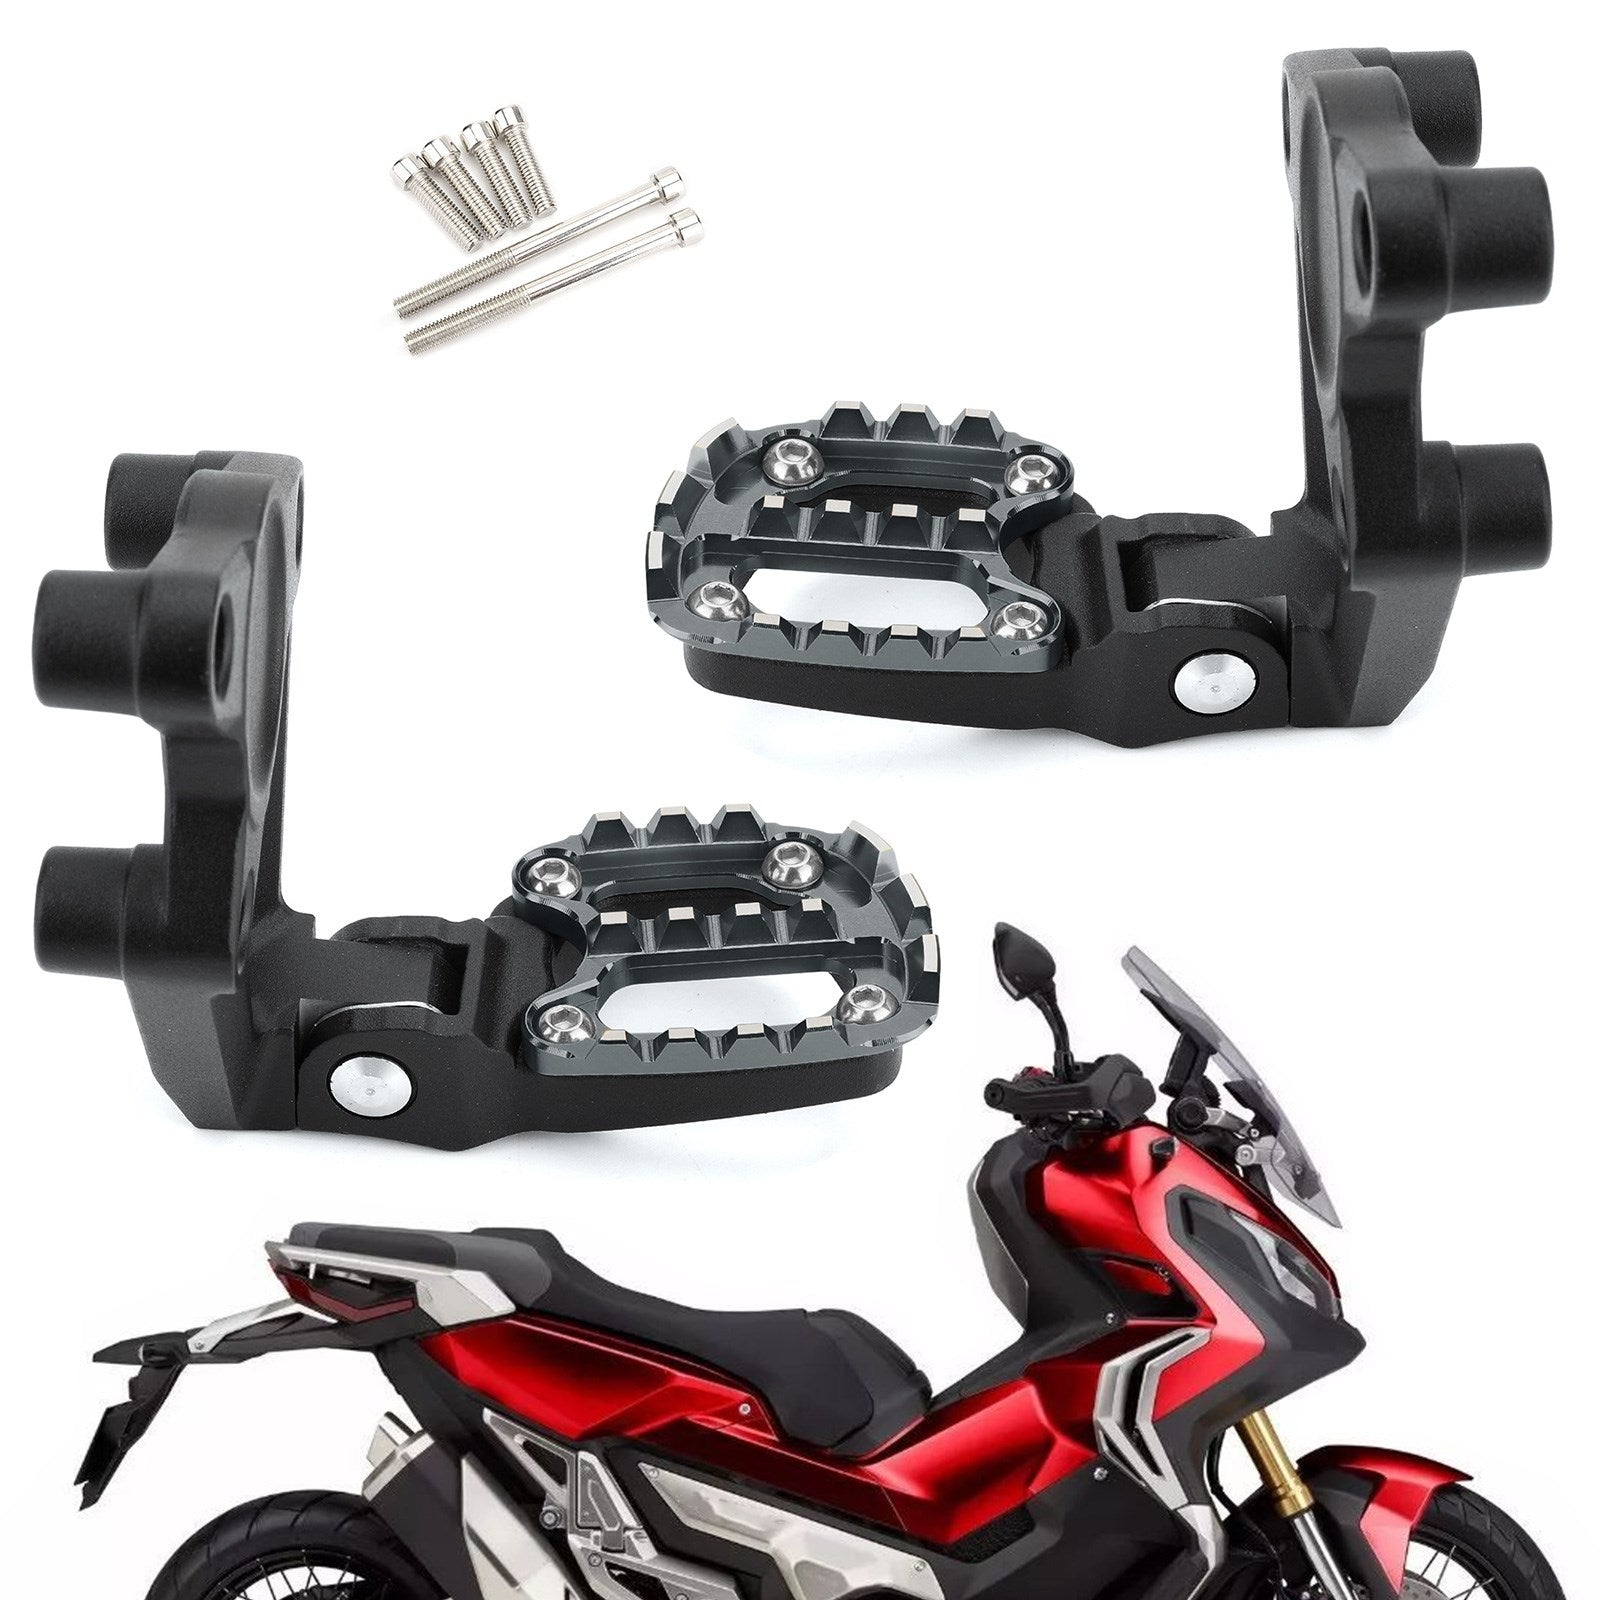 Moto Folding Footrests Foot Pegs Rear Pedals For Honda X-ADV 750 2017-2018 TI